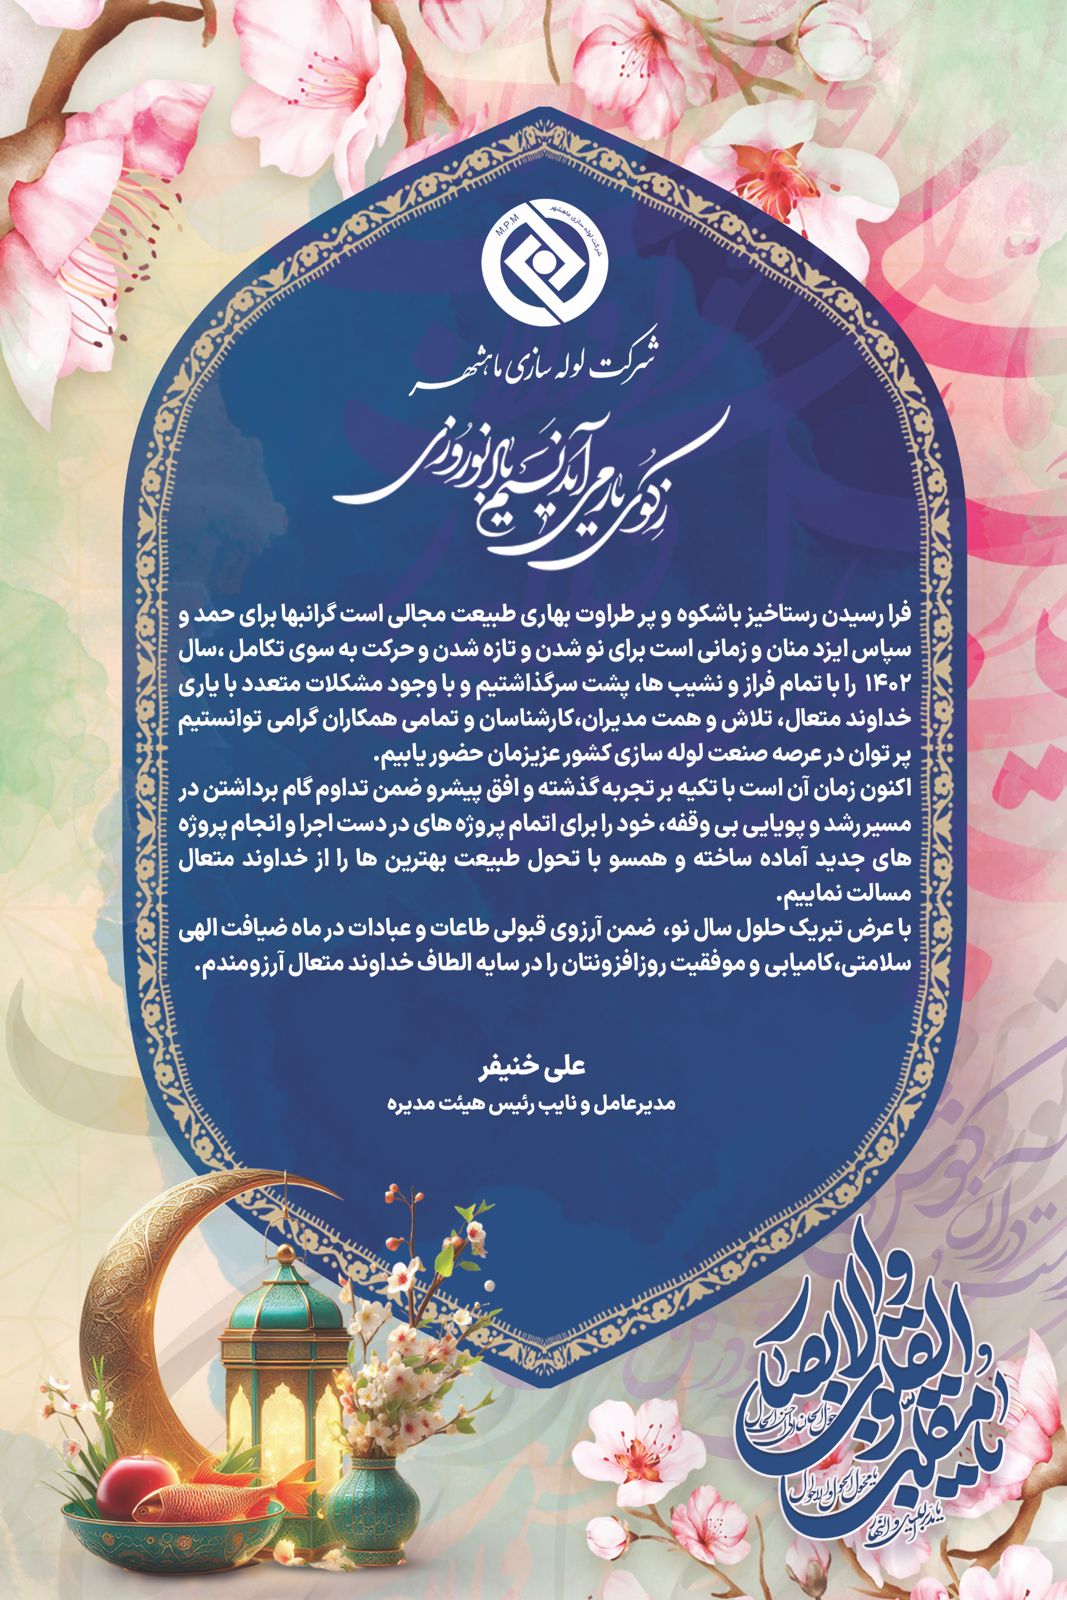 Congratulatory message from the CEO of Mahshahr Piping Company on the occasion of the coming of the new year